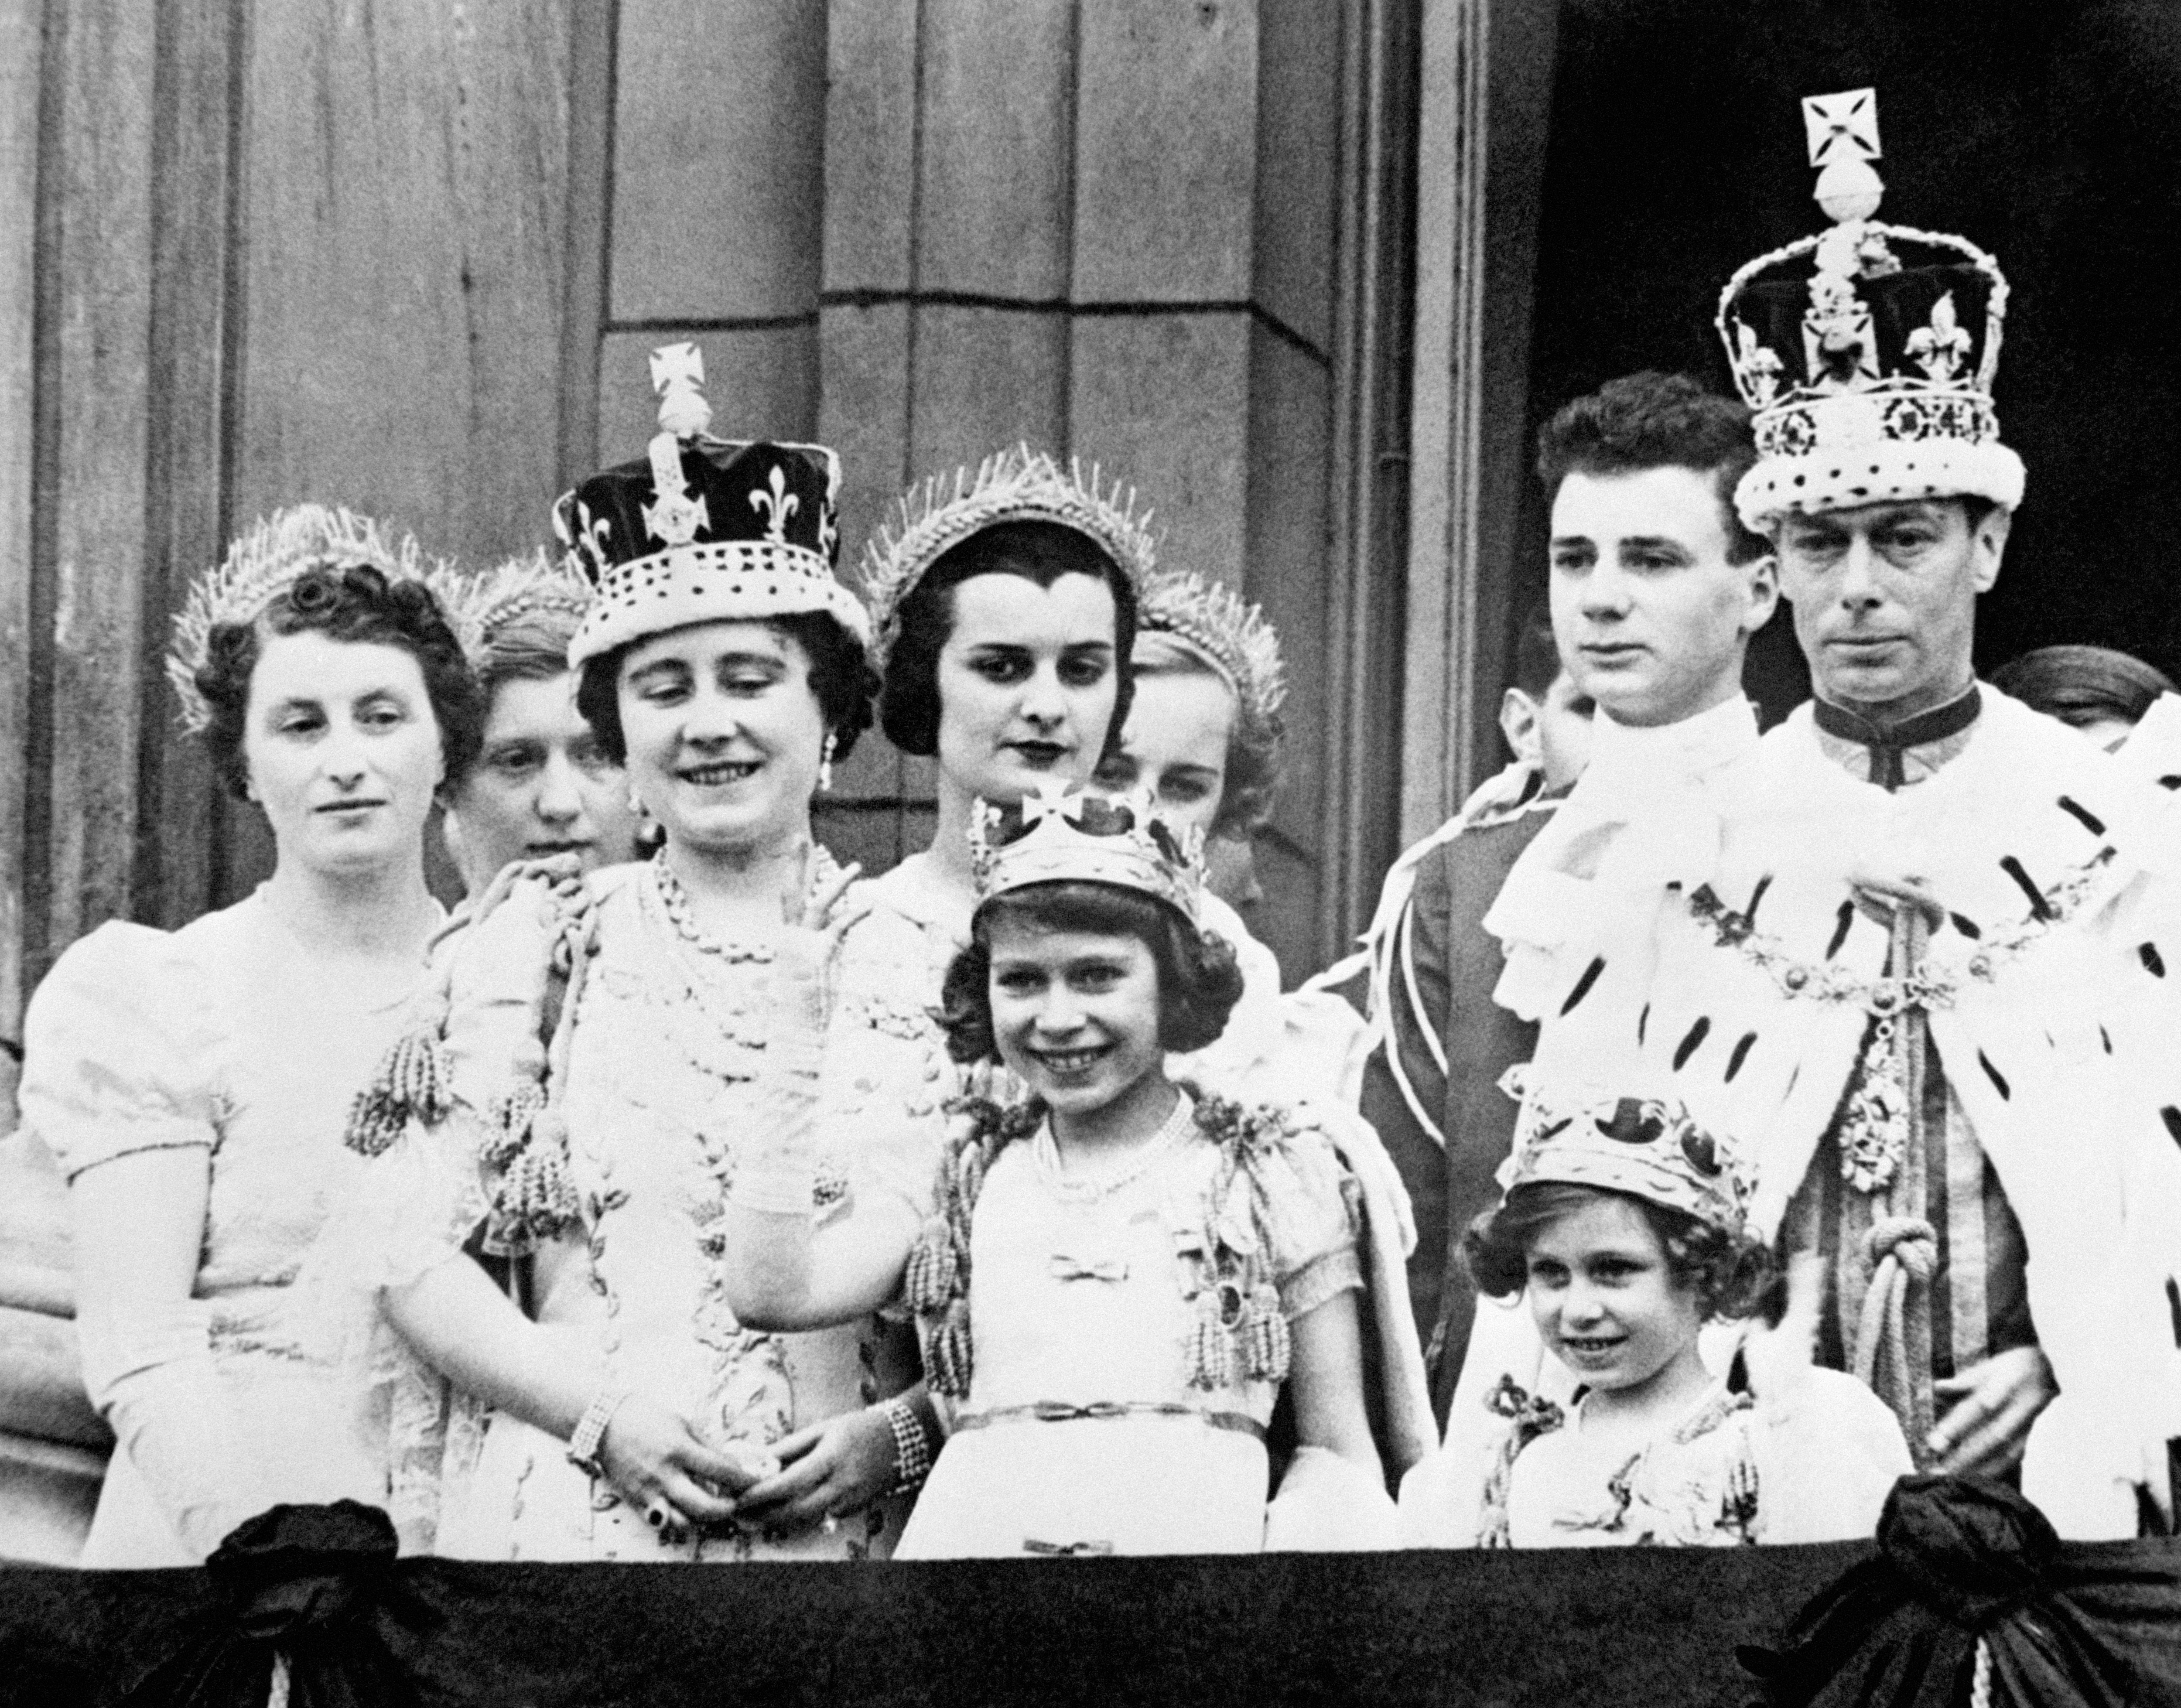 Queen Elizabeth (later the Queen Mother), Princess Elizabeth (the present Queen Elizabeth II), Princess Margaret and King George VI after his coronation, on the balcony of Buckingham Palace, London